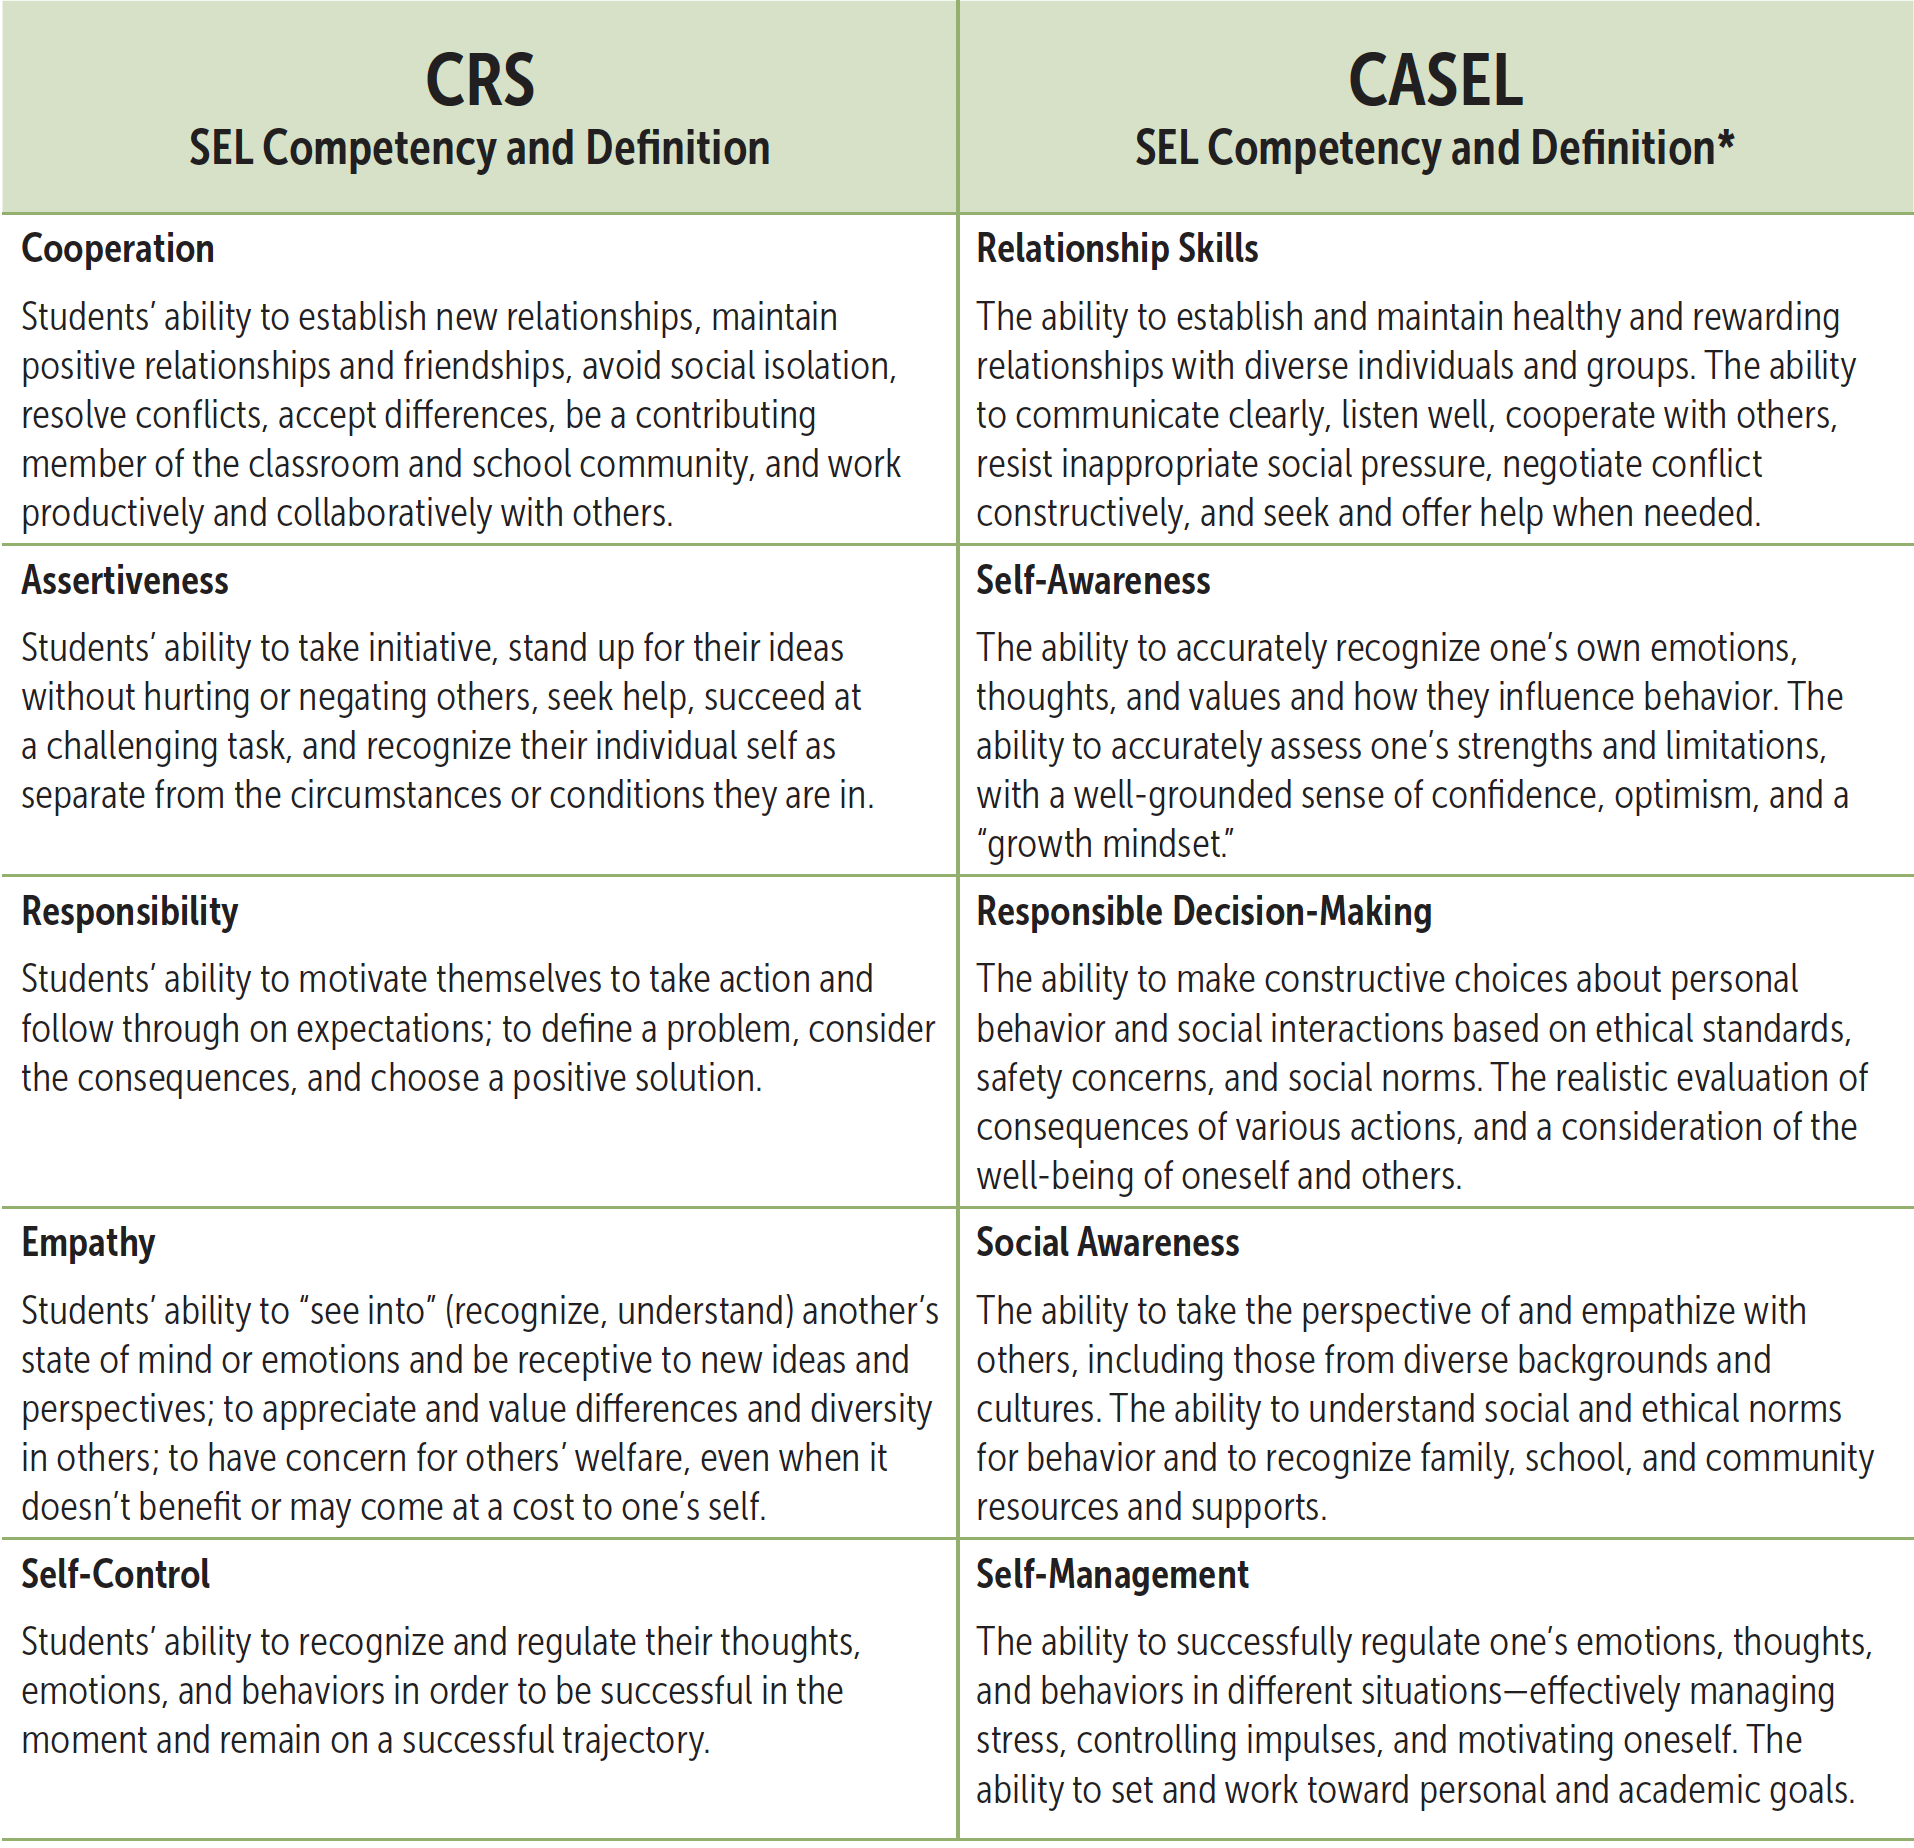 SEL Competency and definition